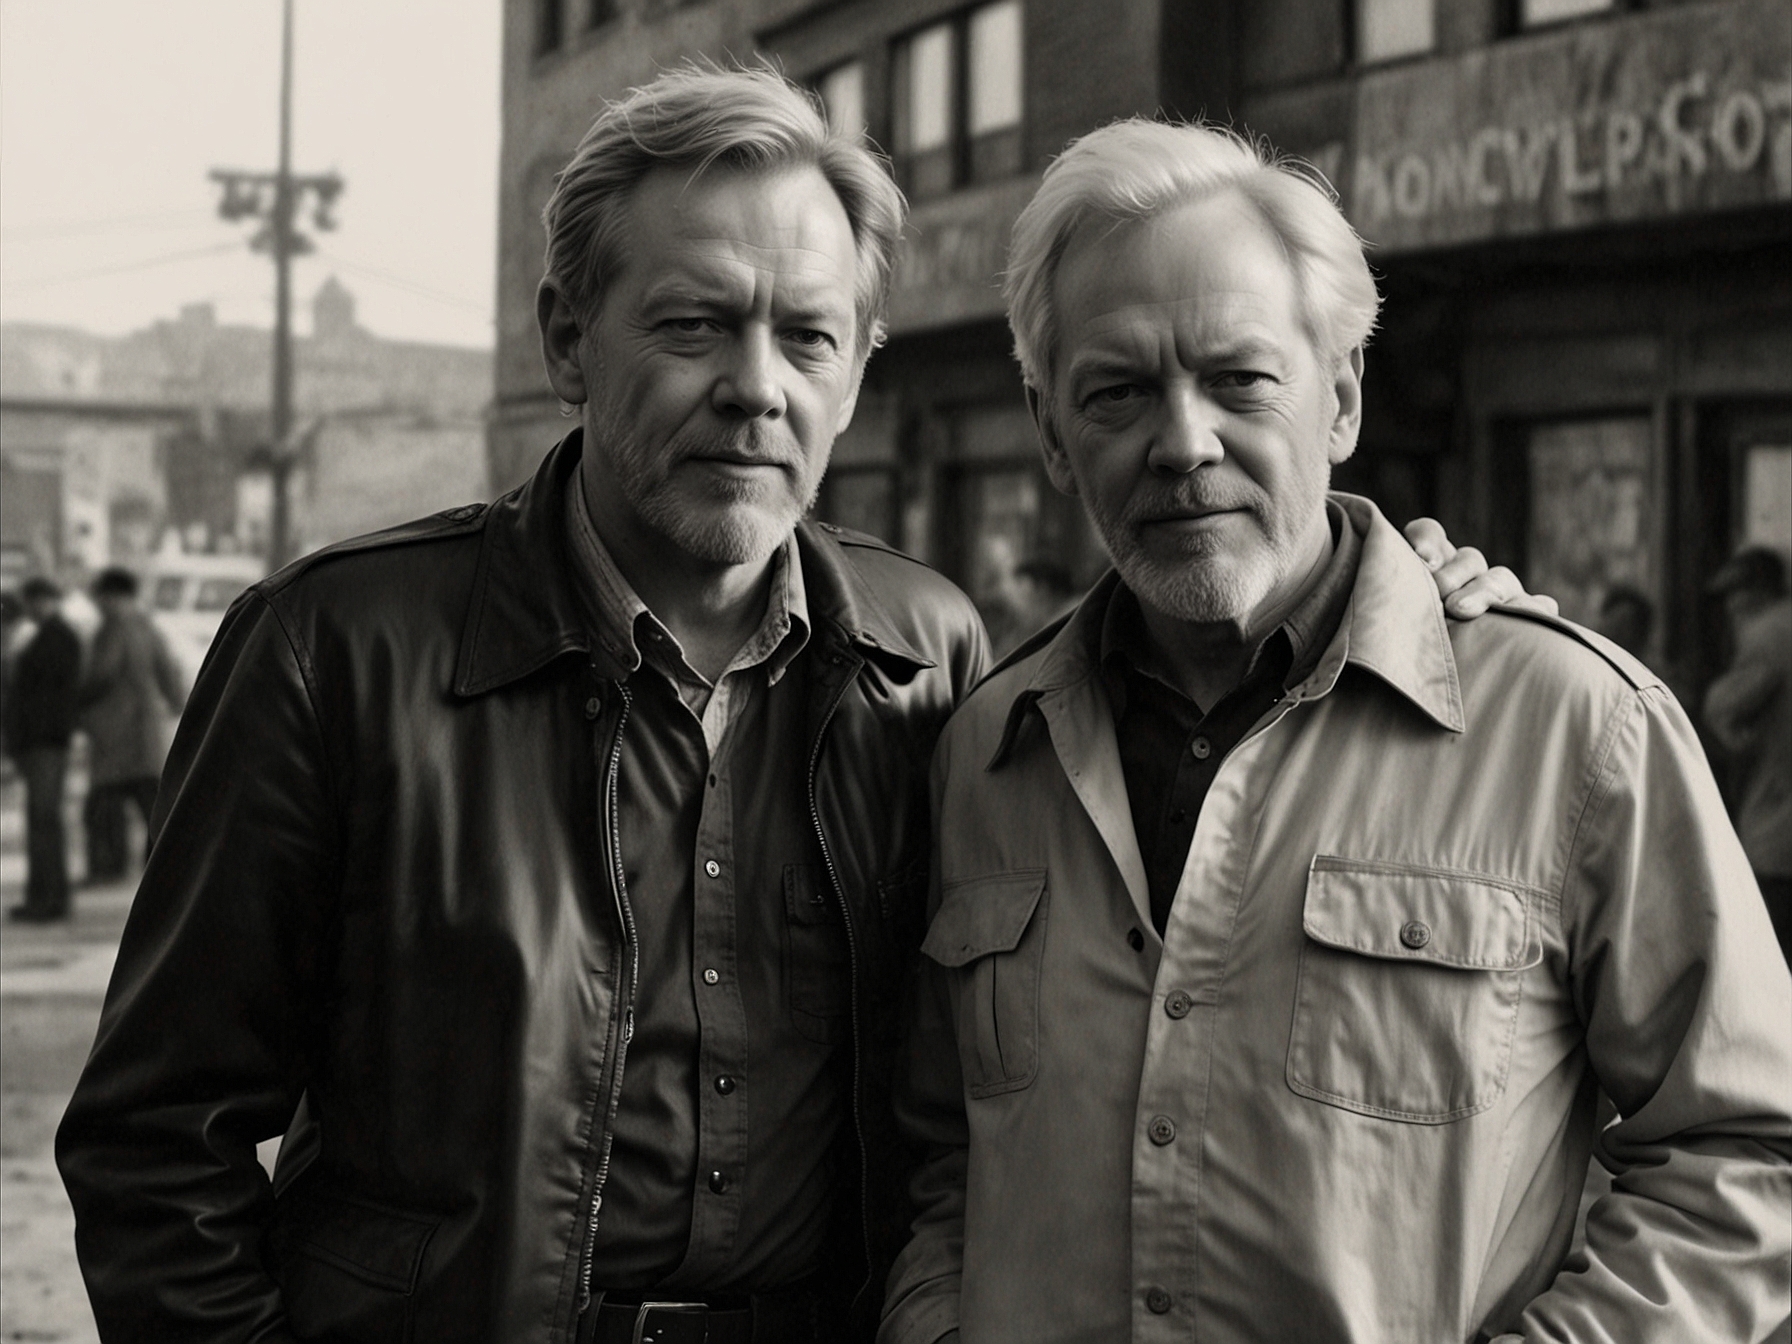 A younger Kiefer and Donald Sutherland on a Hollywood set, illustrating the bond they formed through their shared love for acting and professional collaboration.